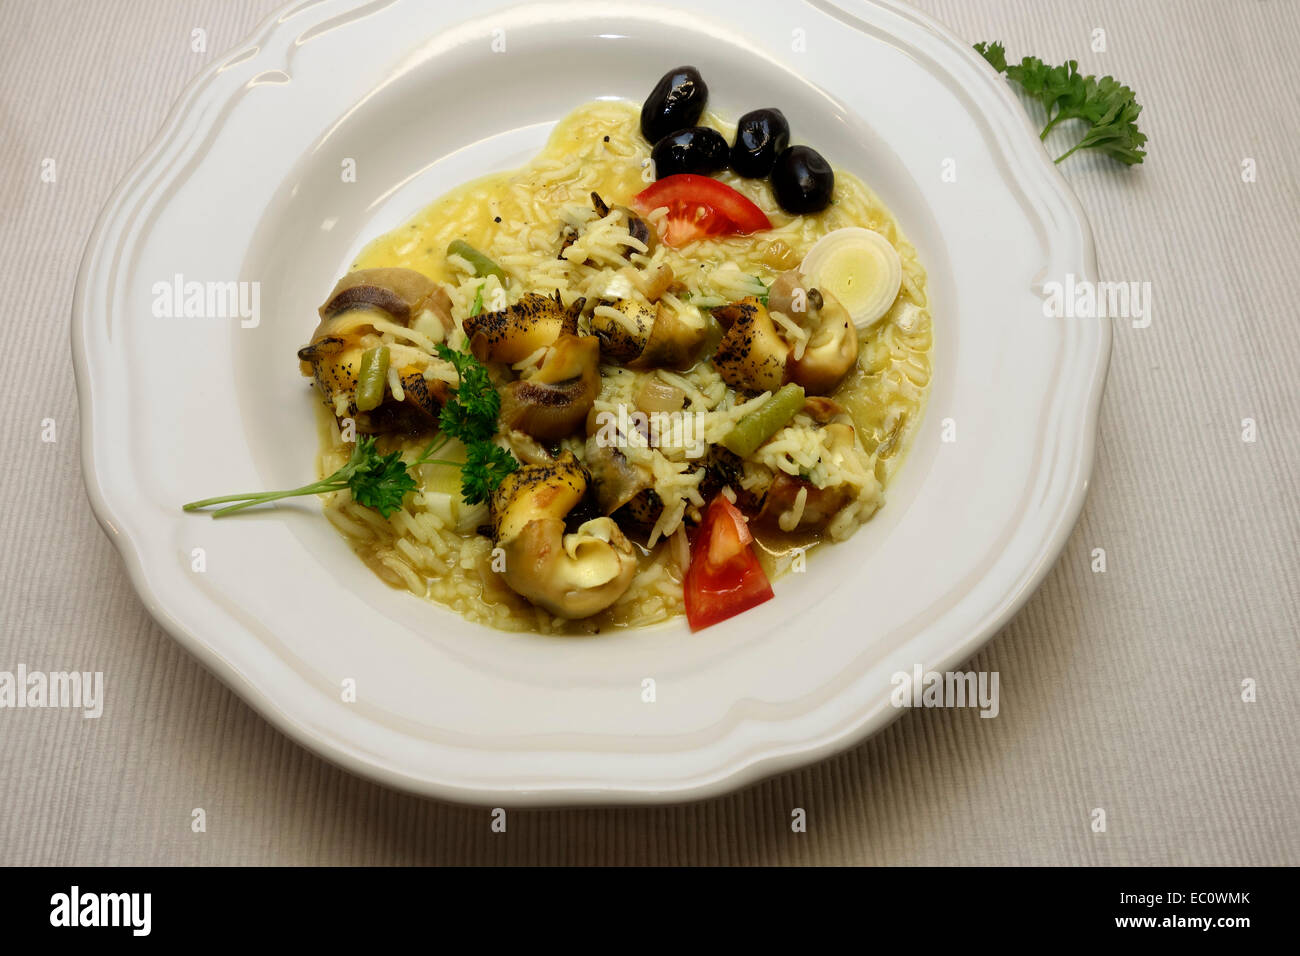 Risotto with meat of whelks served on white plate with addition of black olives and tomato. Stock Photo